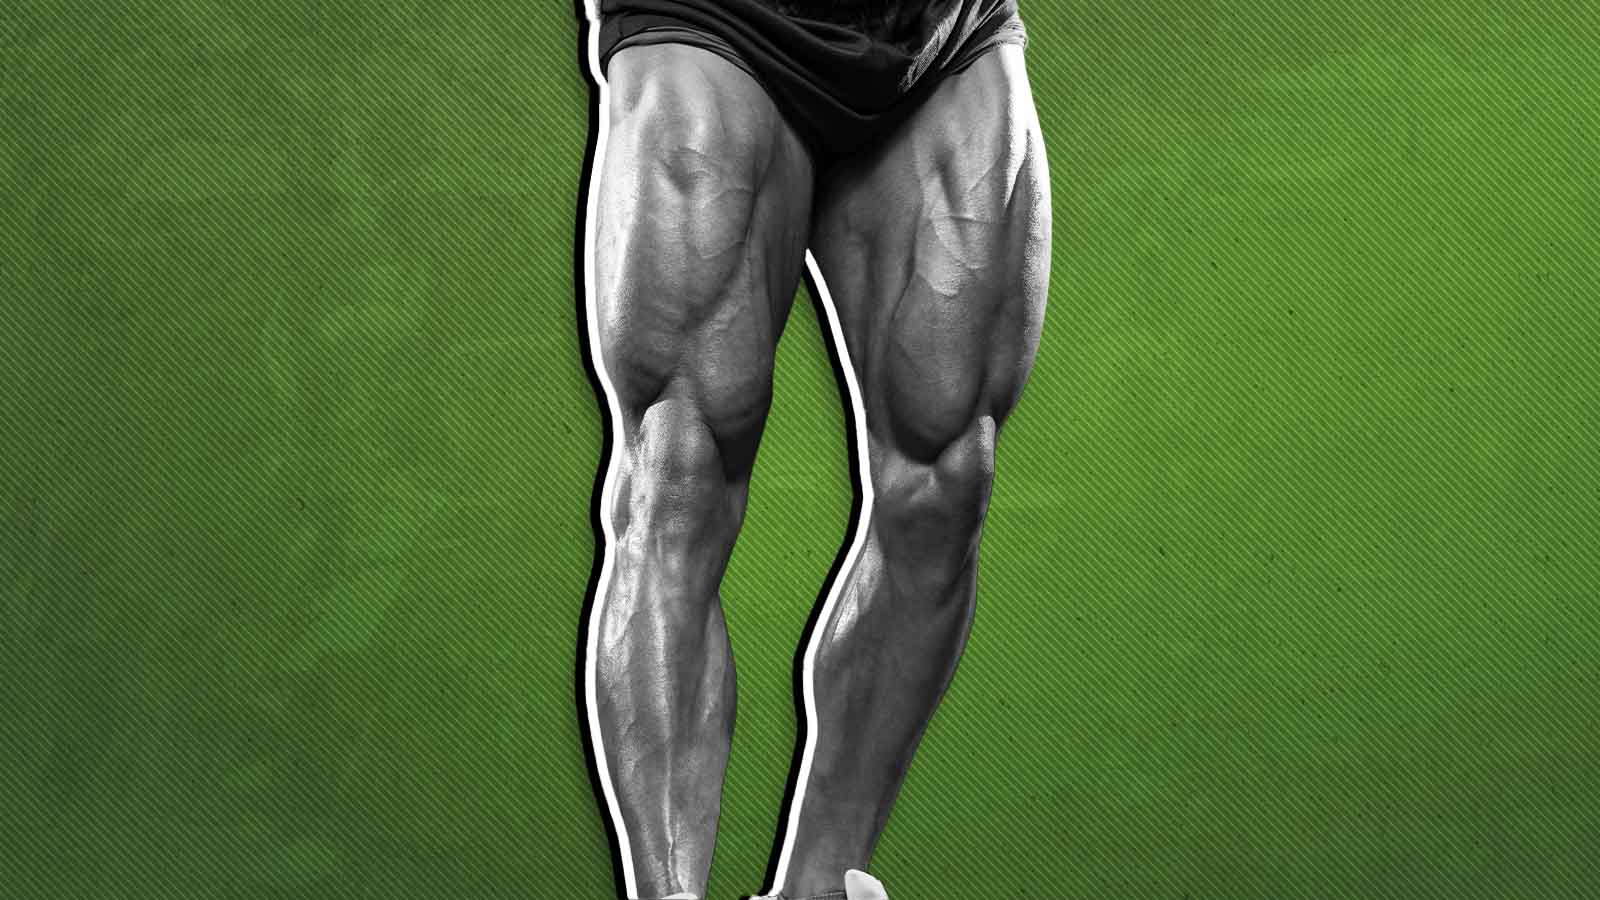 The Anatomy of Your Leg Muscles, Explained (and How To Train Them)